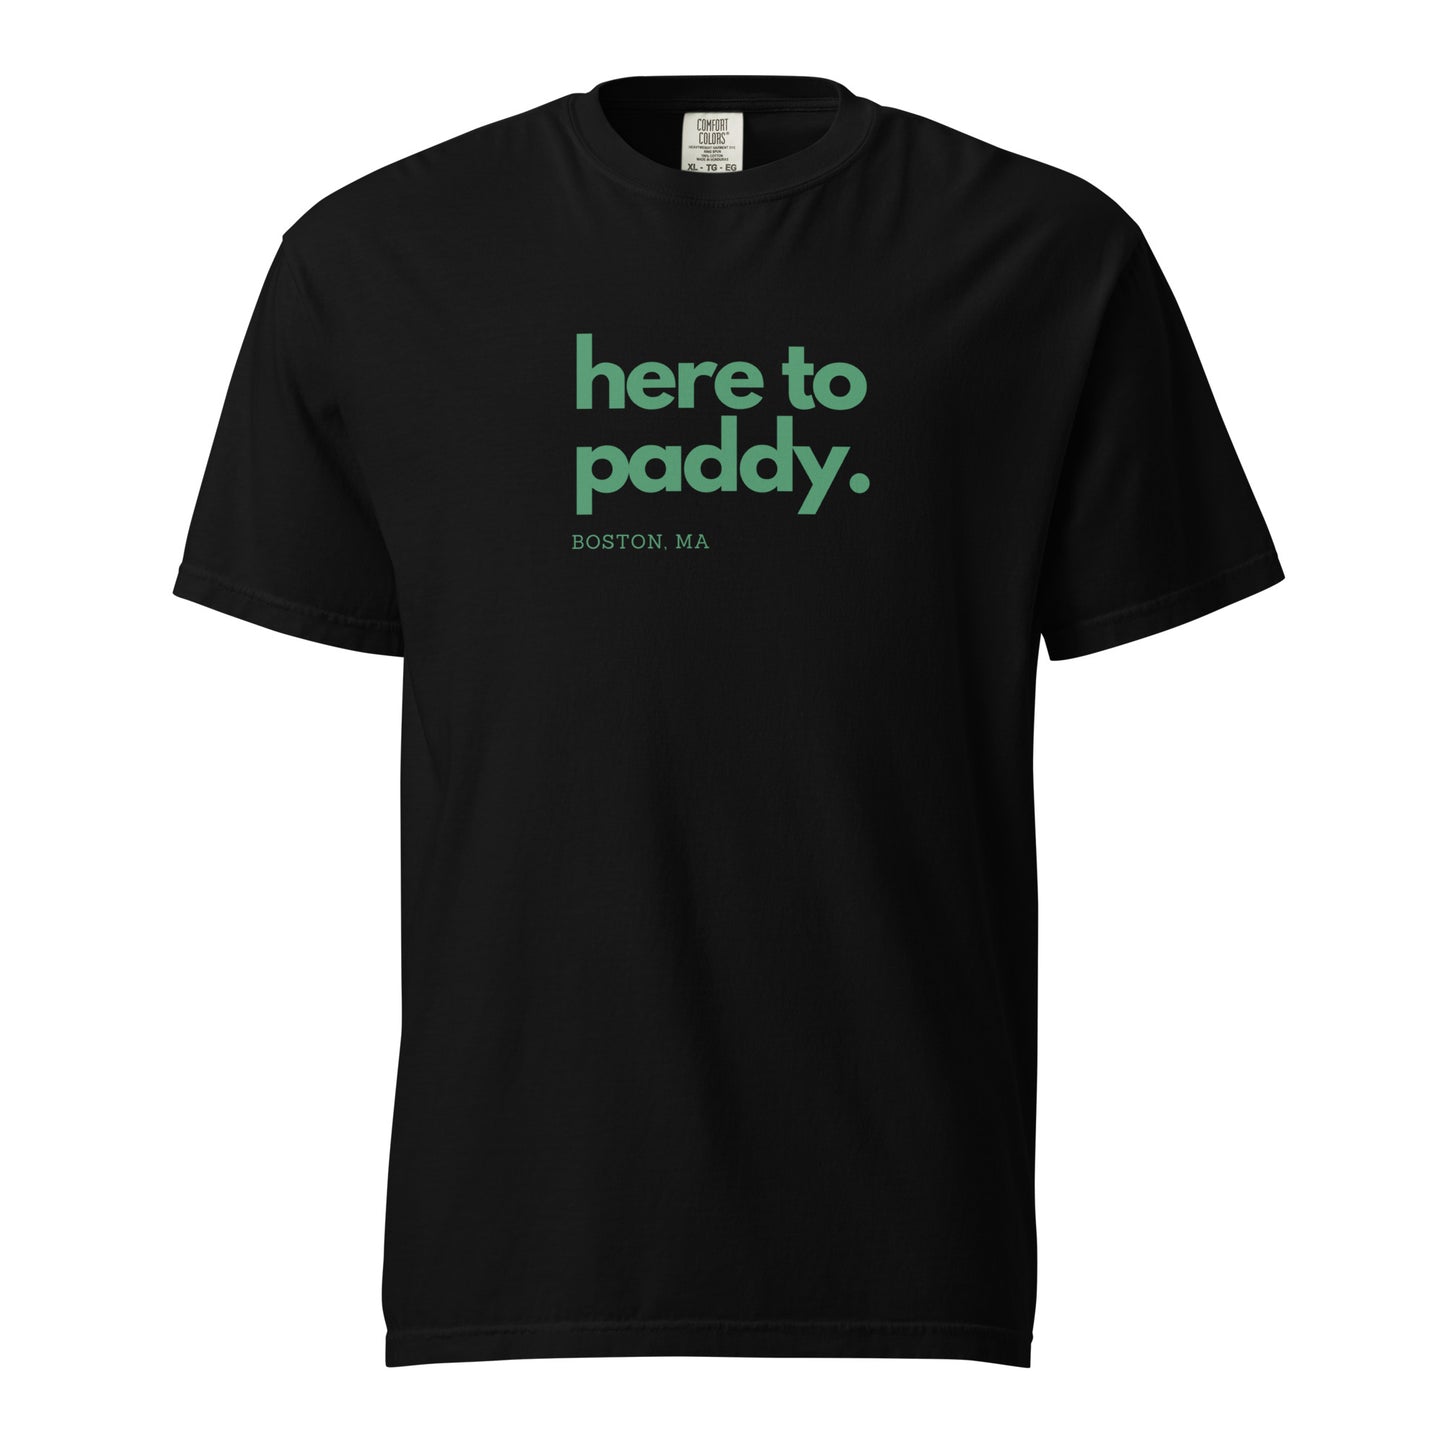 Here to paddy t-shirt